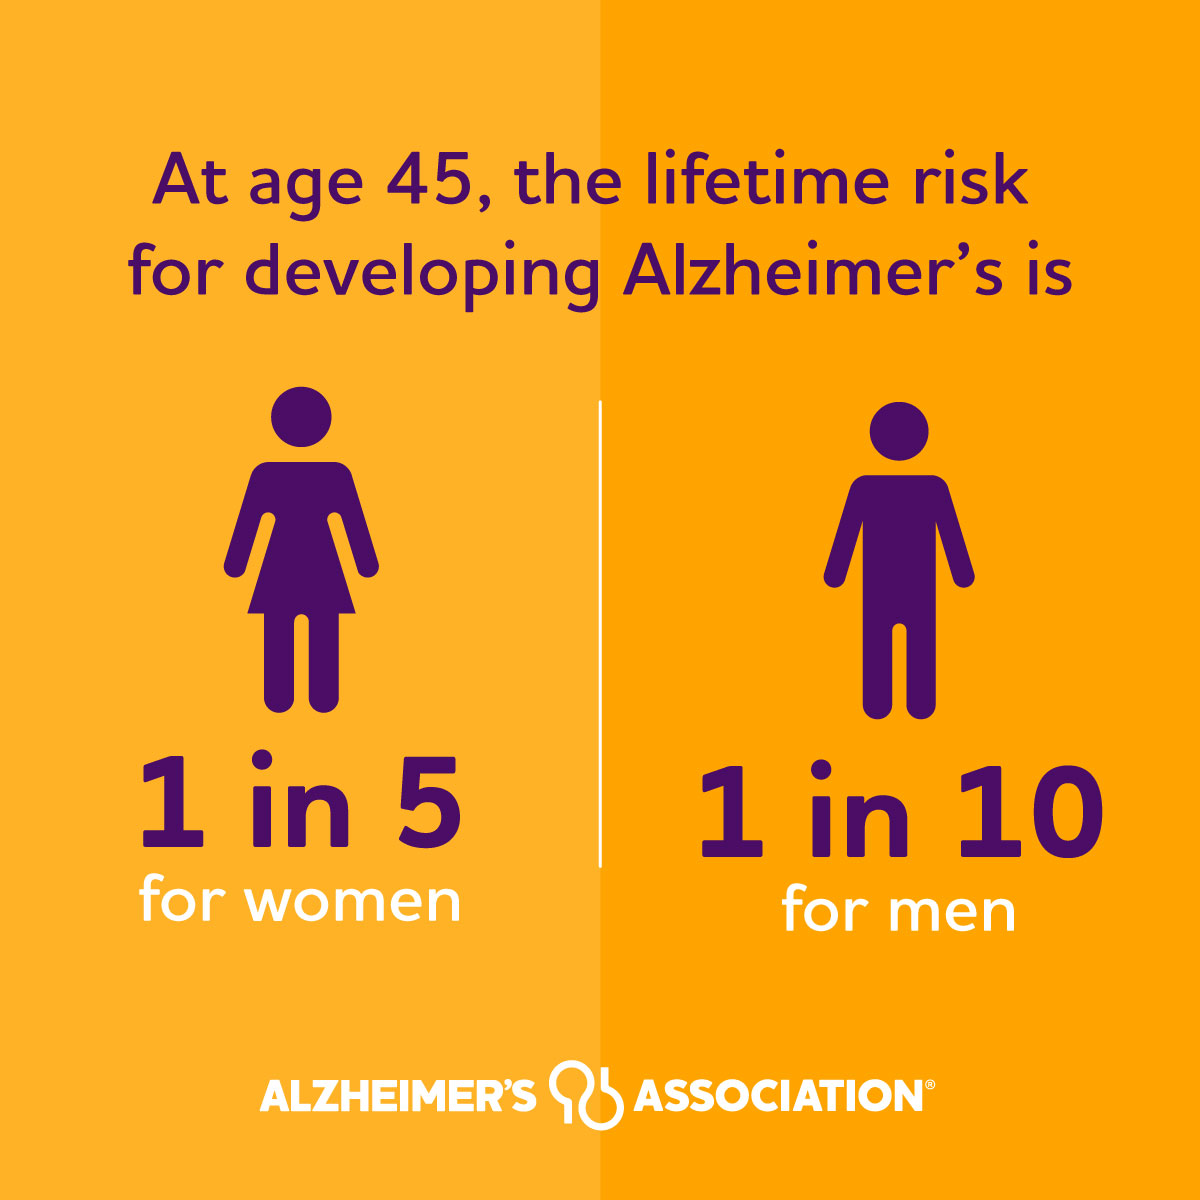 These odds are unsettling. Share the facts and join the fight to end Alzheimer’s. alz.org/facts #ENDALZ